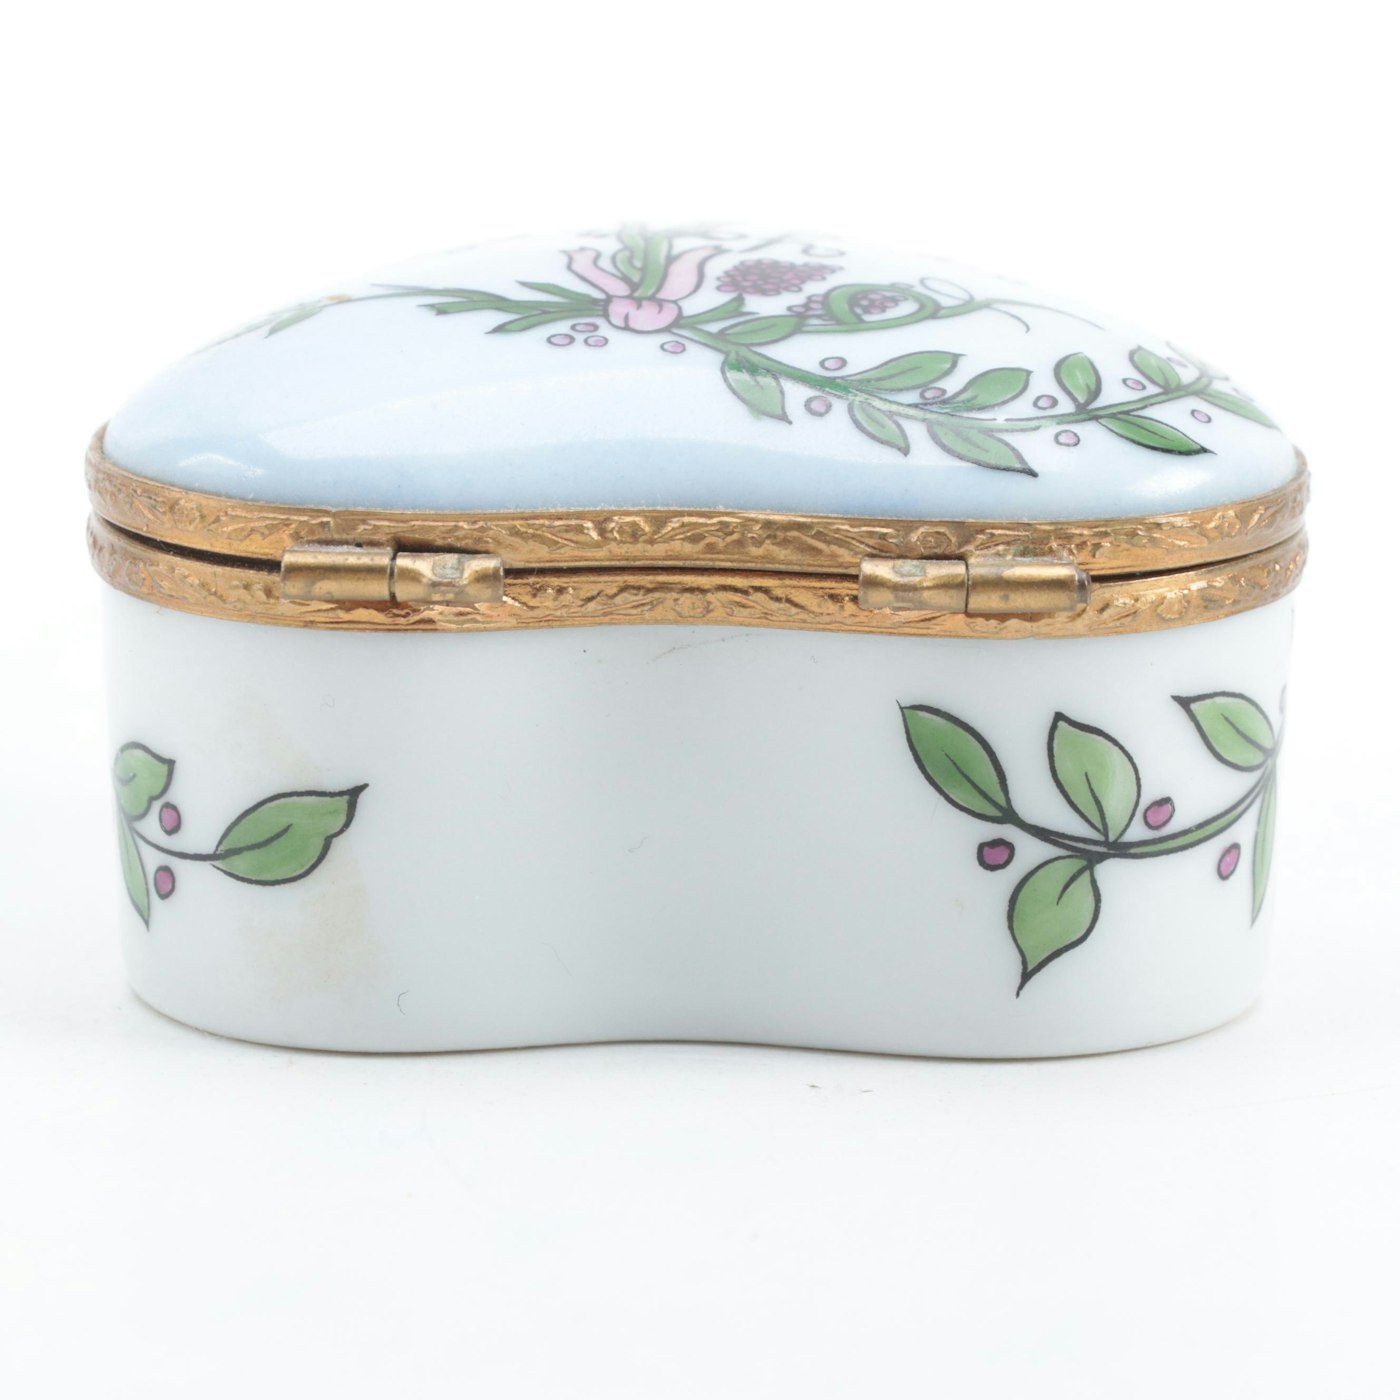 Gerard Ribierre Hand-Painted Porcelain Heart Limoges Box | EBTH